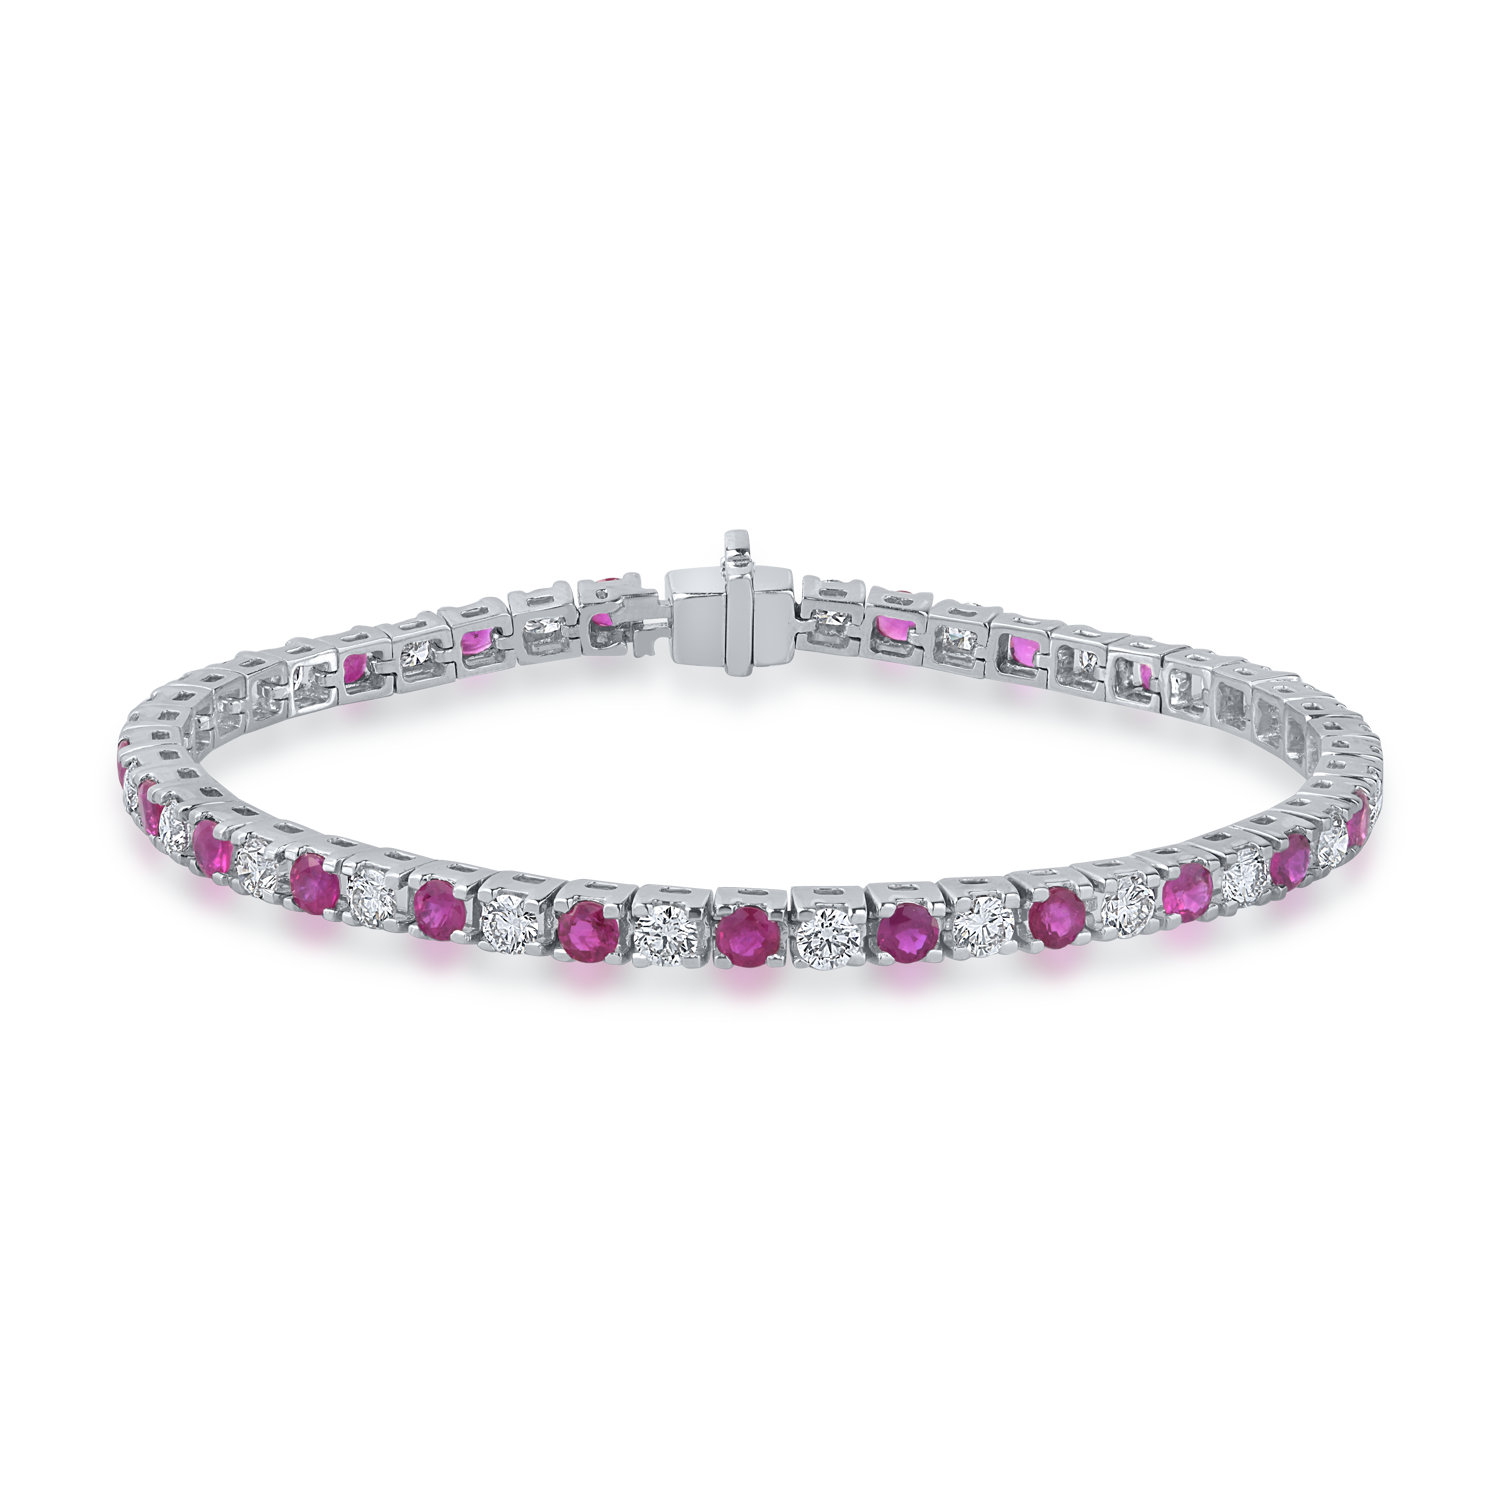 White gold tennis bracelet with 3.89ct rubies and 3.01ct diamonds